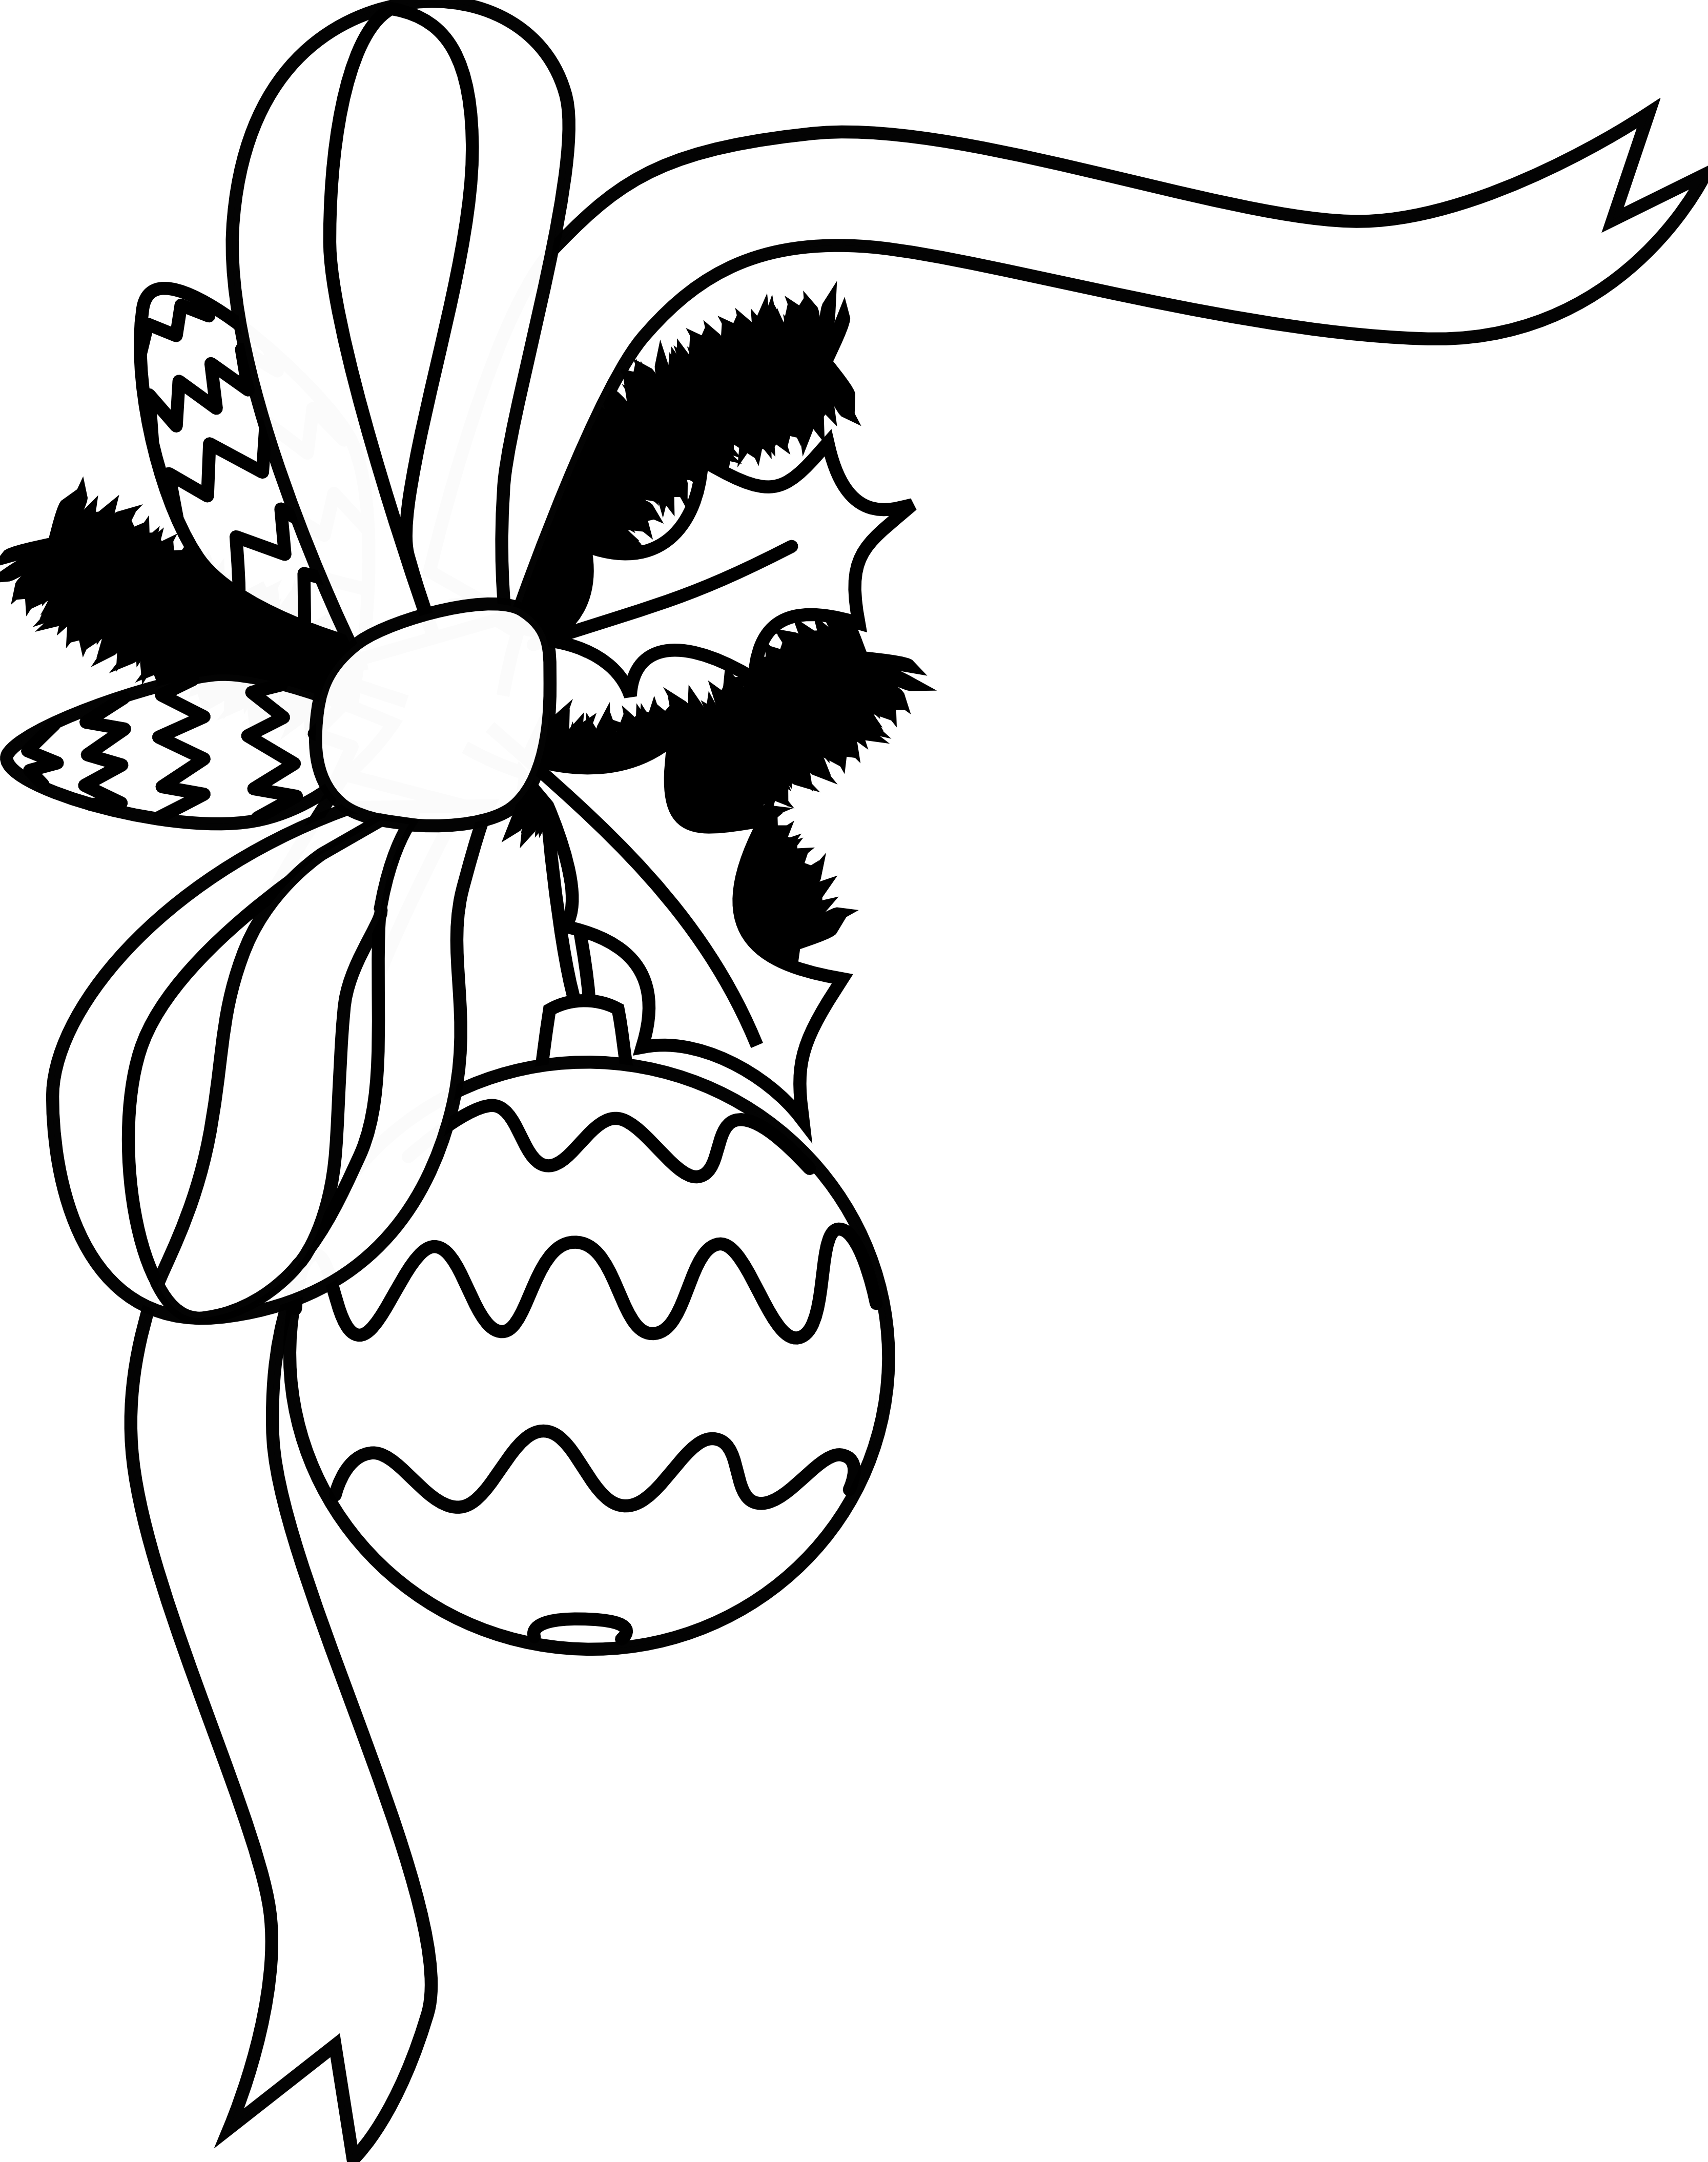 Christmas clipart black and white. Free images download clip